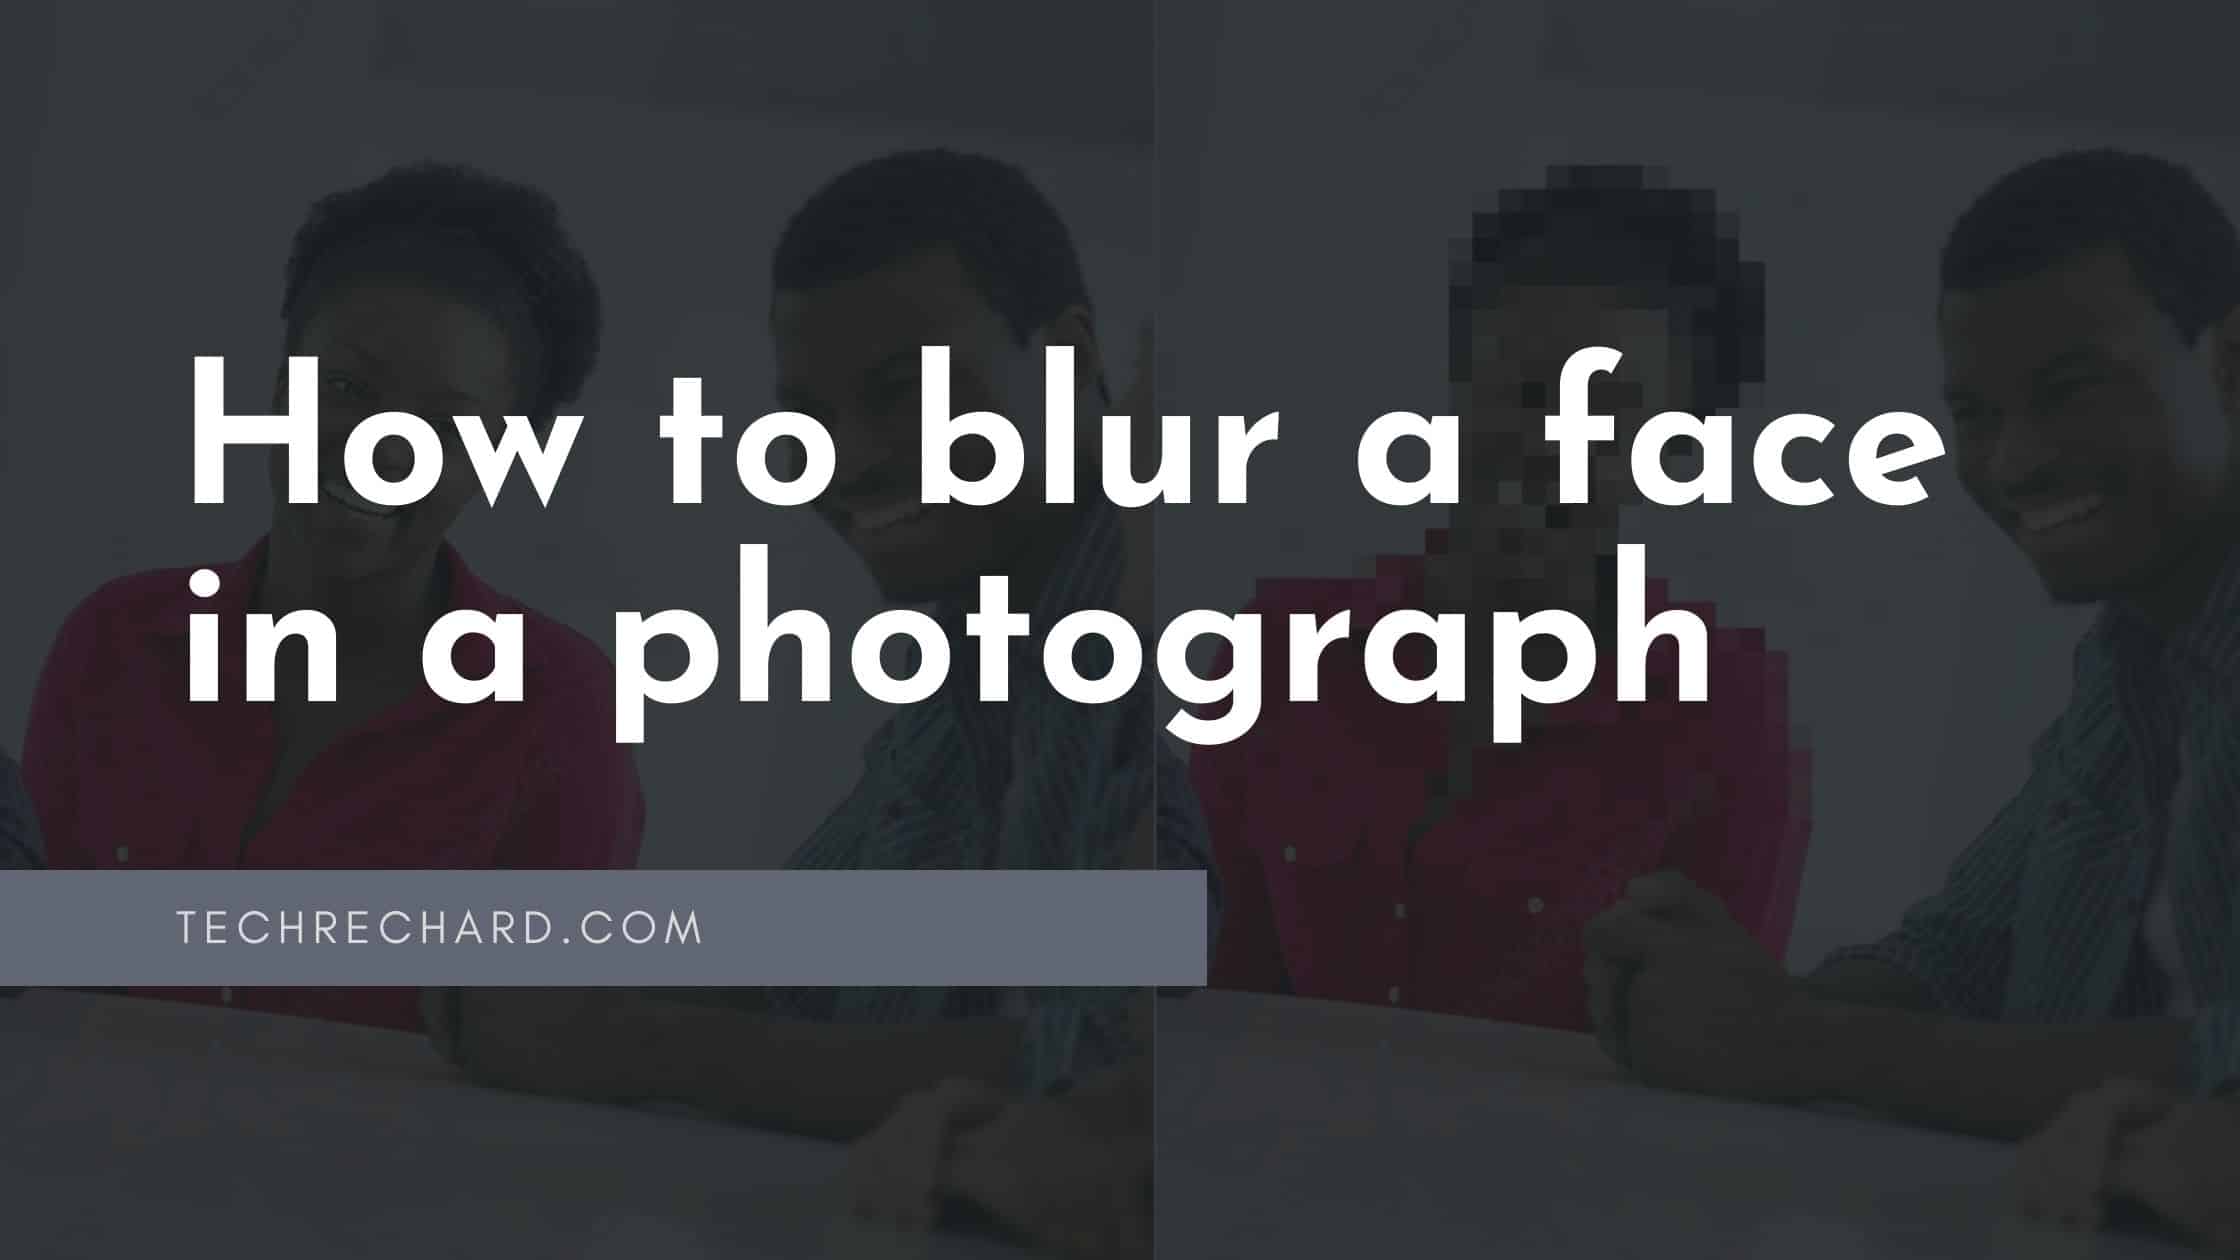 How to Pixelate or Blur a Face in a Photograph: 3 Easy Ways